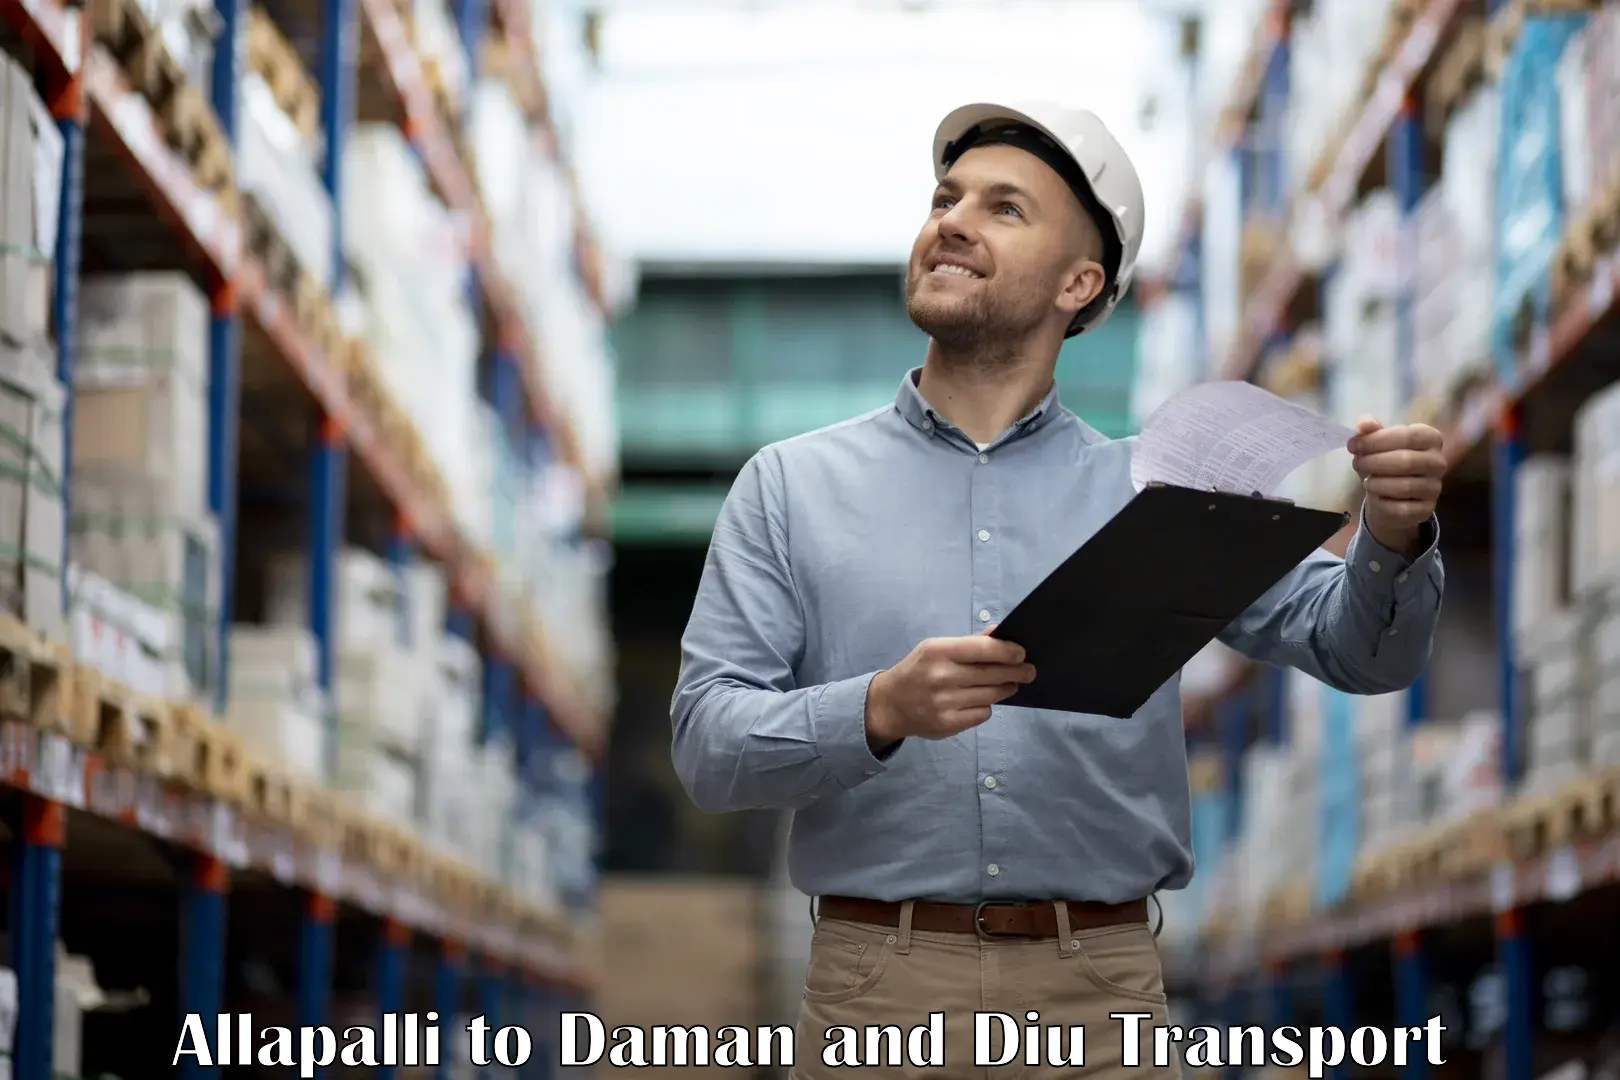 Road transport online services Allapalli to Daman and Diu